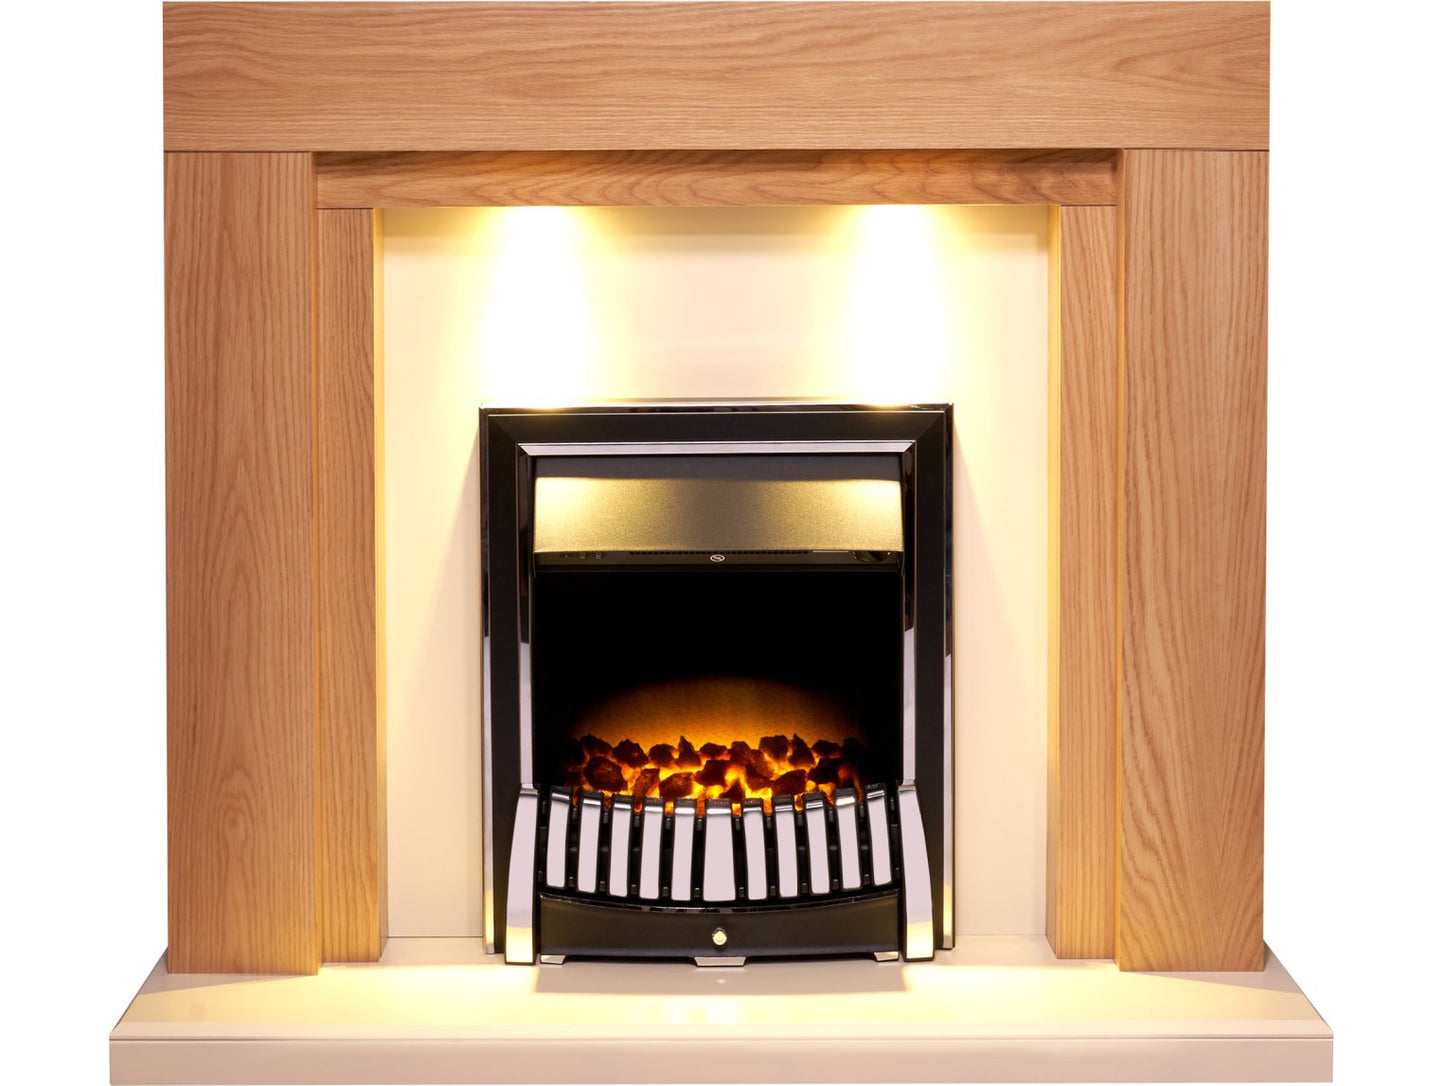 Adam Beaumont Fireplace Suite in Oak & Cream with Elan Electric Fire in Chrome, 48 Inch